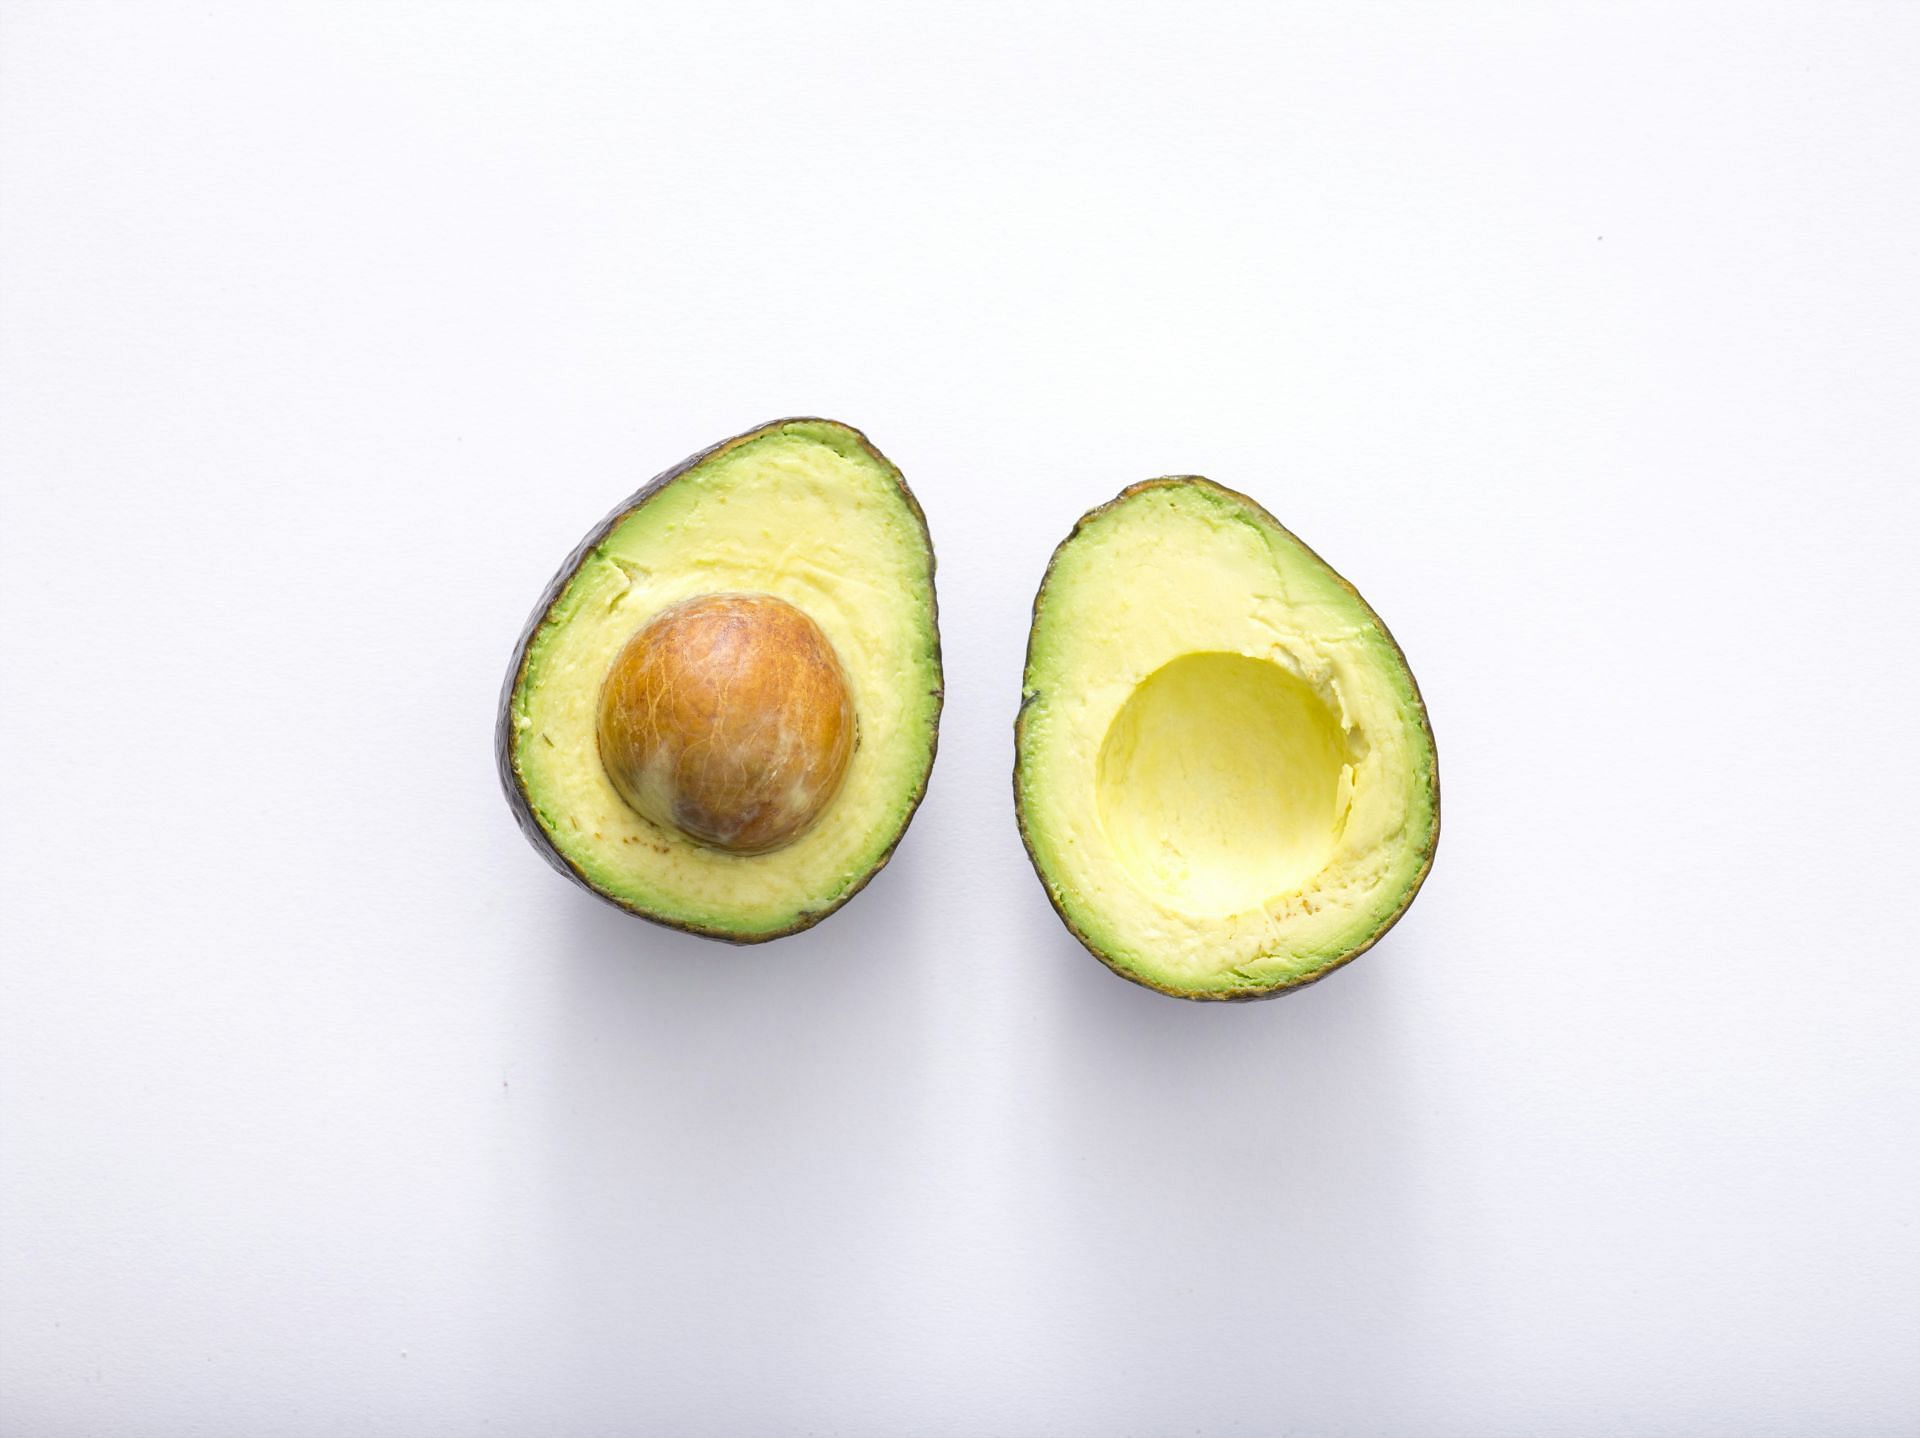 Stuff avocados with tuna for a low-calorie high-protein lunch option (Image by Thought Catalog/Unsplash)